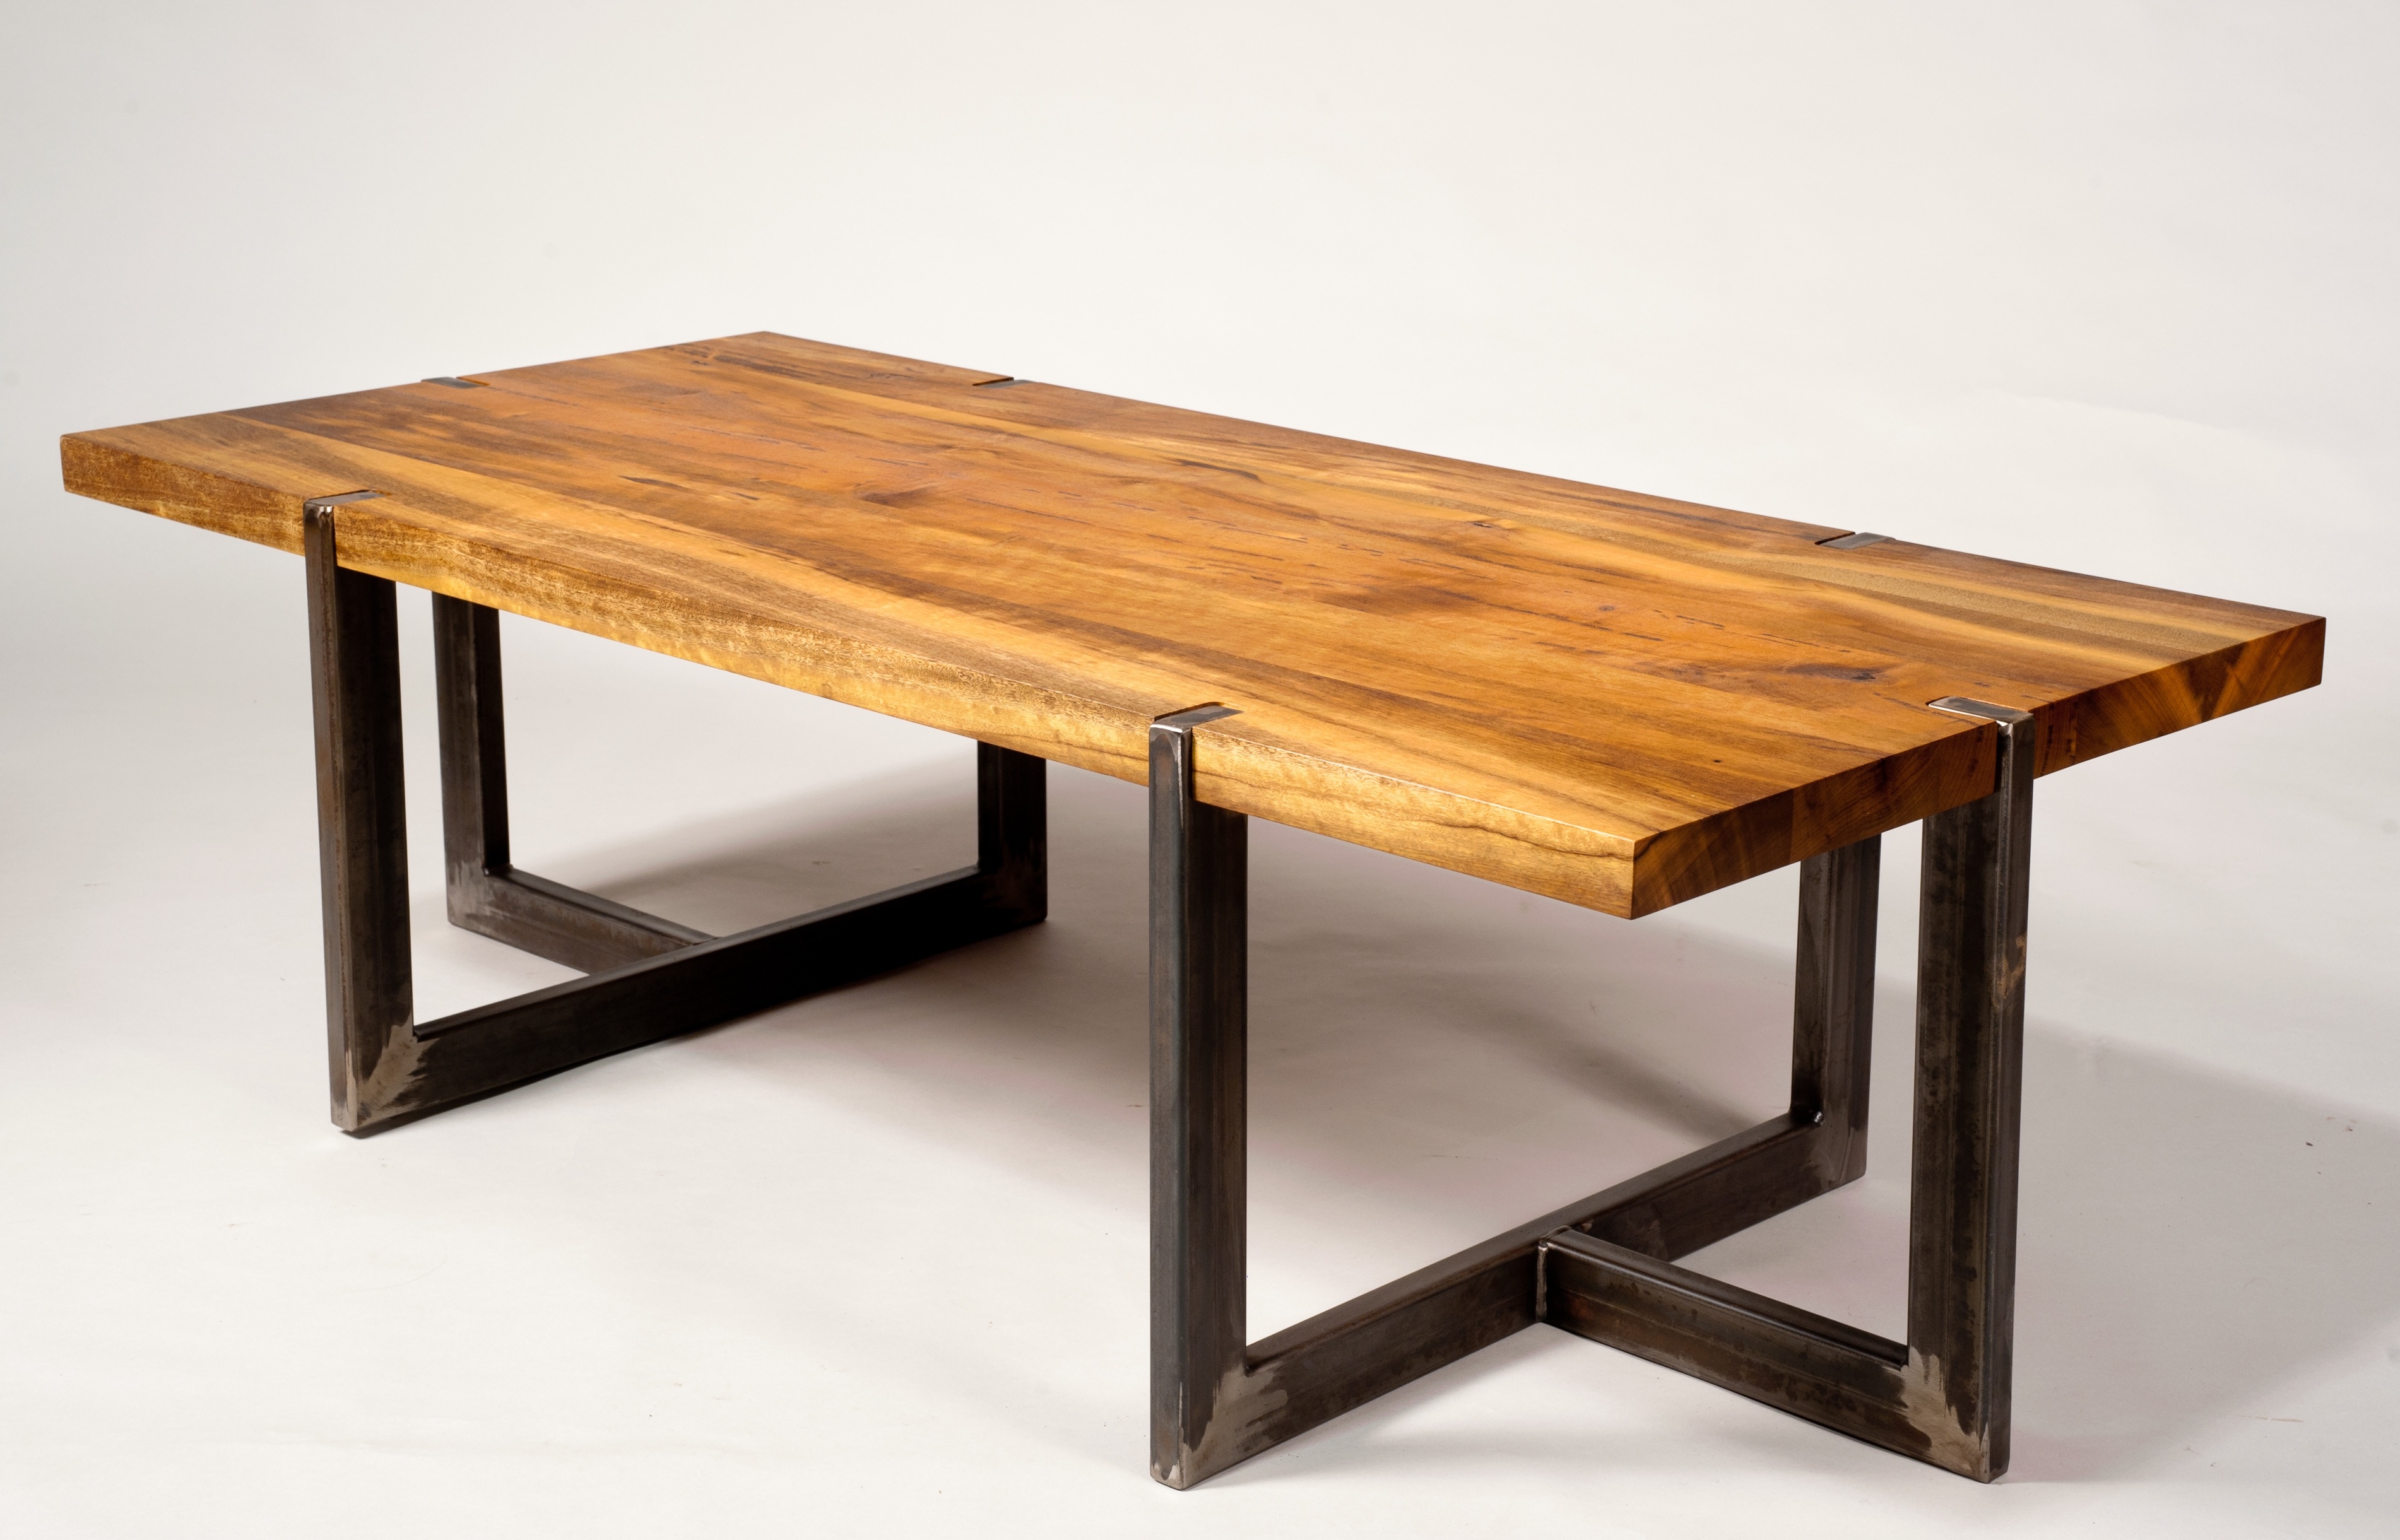 wood table design ideas pictures photo - 8